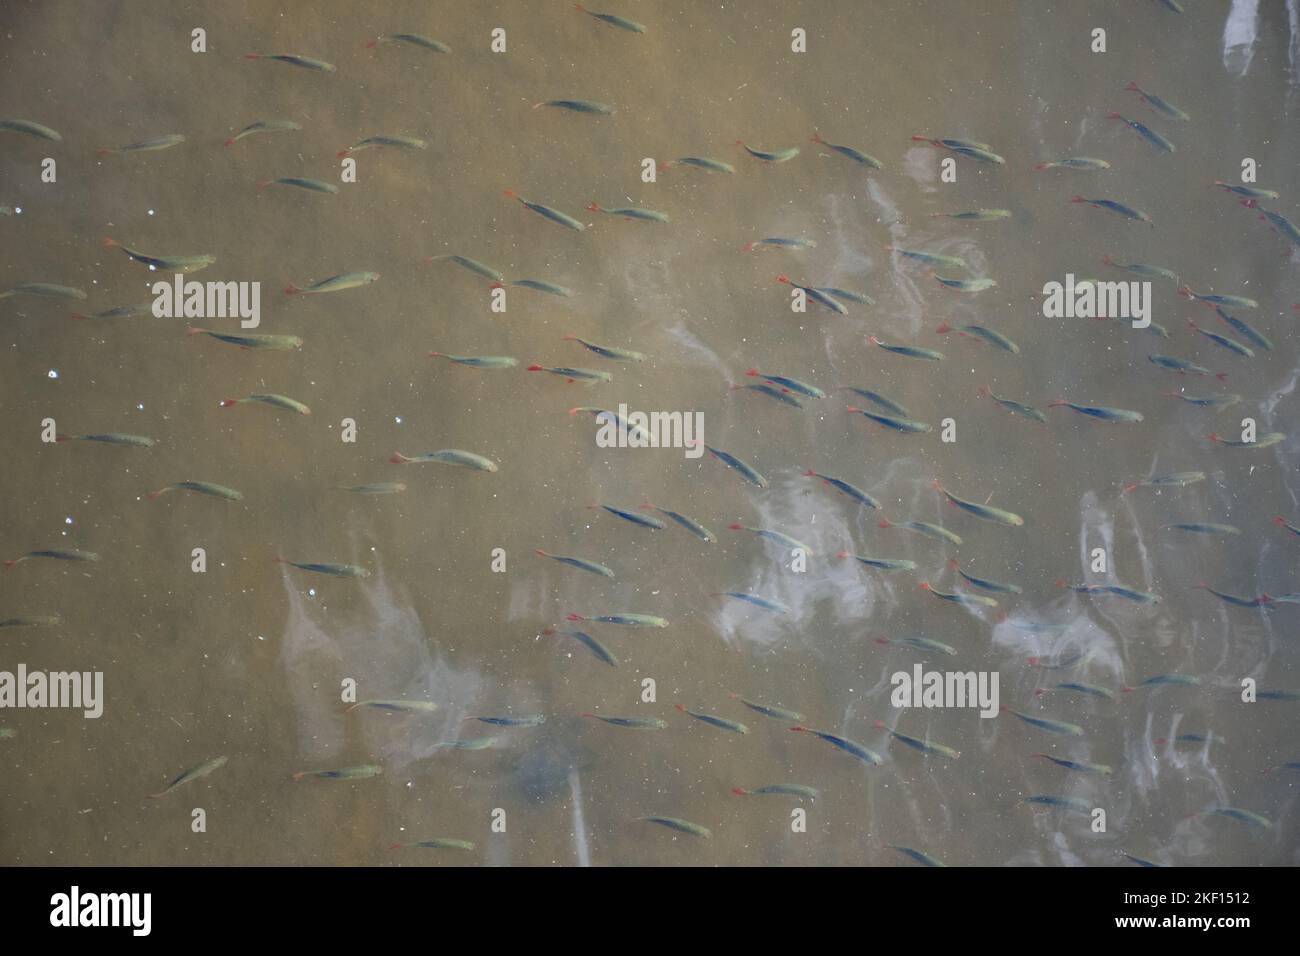 Rudd shoal at the surface of canal Stock Photo